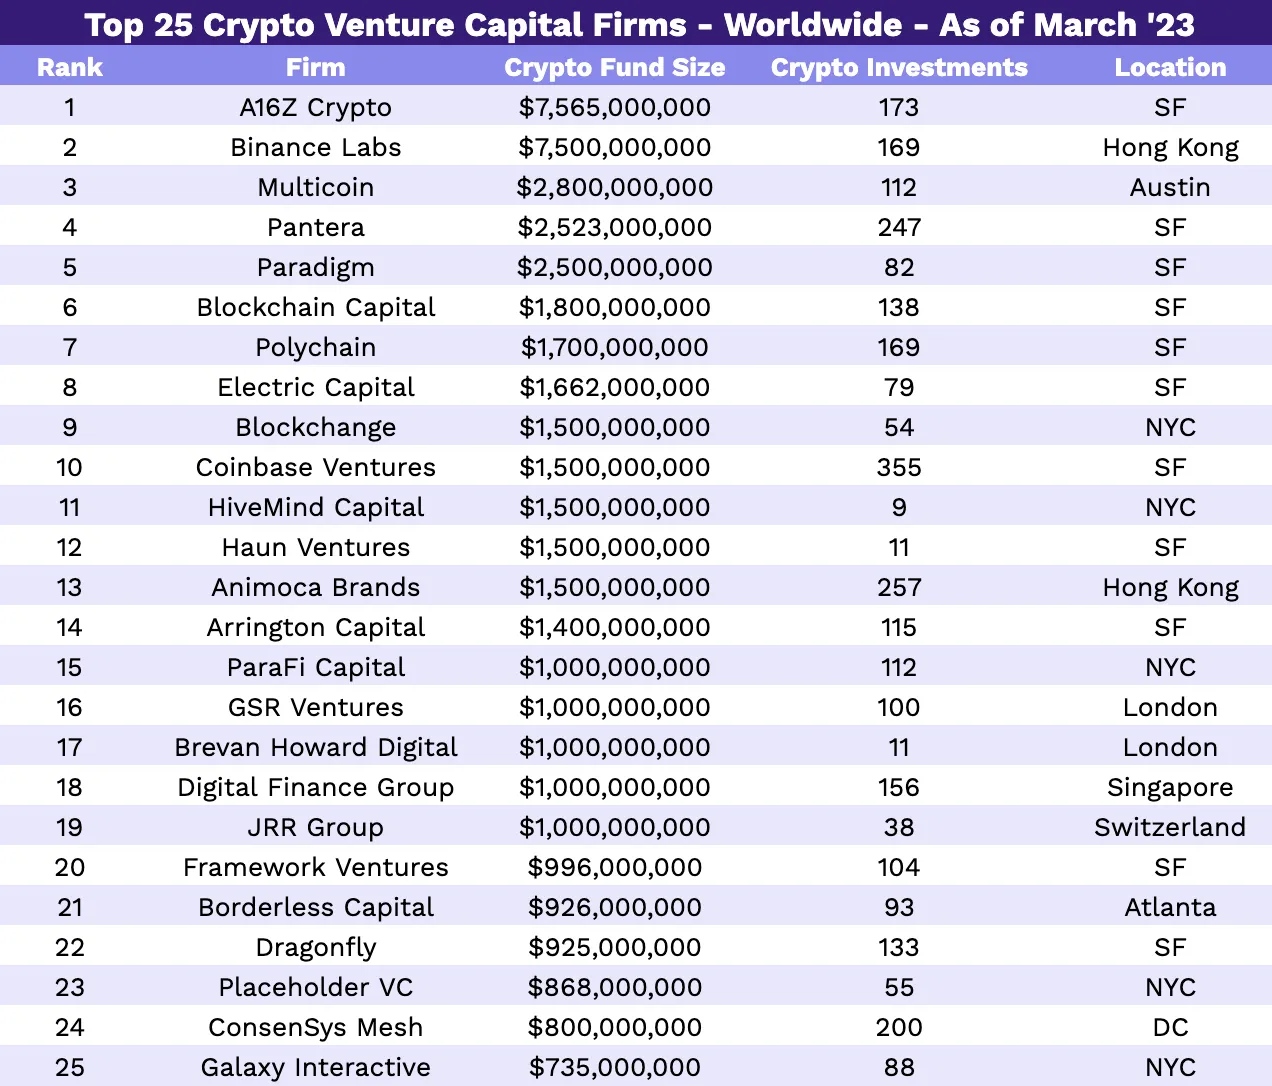 Top 25 crypto VC firms as of March 2023, Source: The Crypto VC List 2023, Coinstack, March 2023